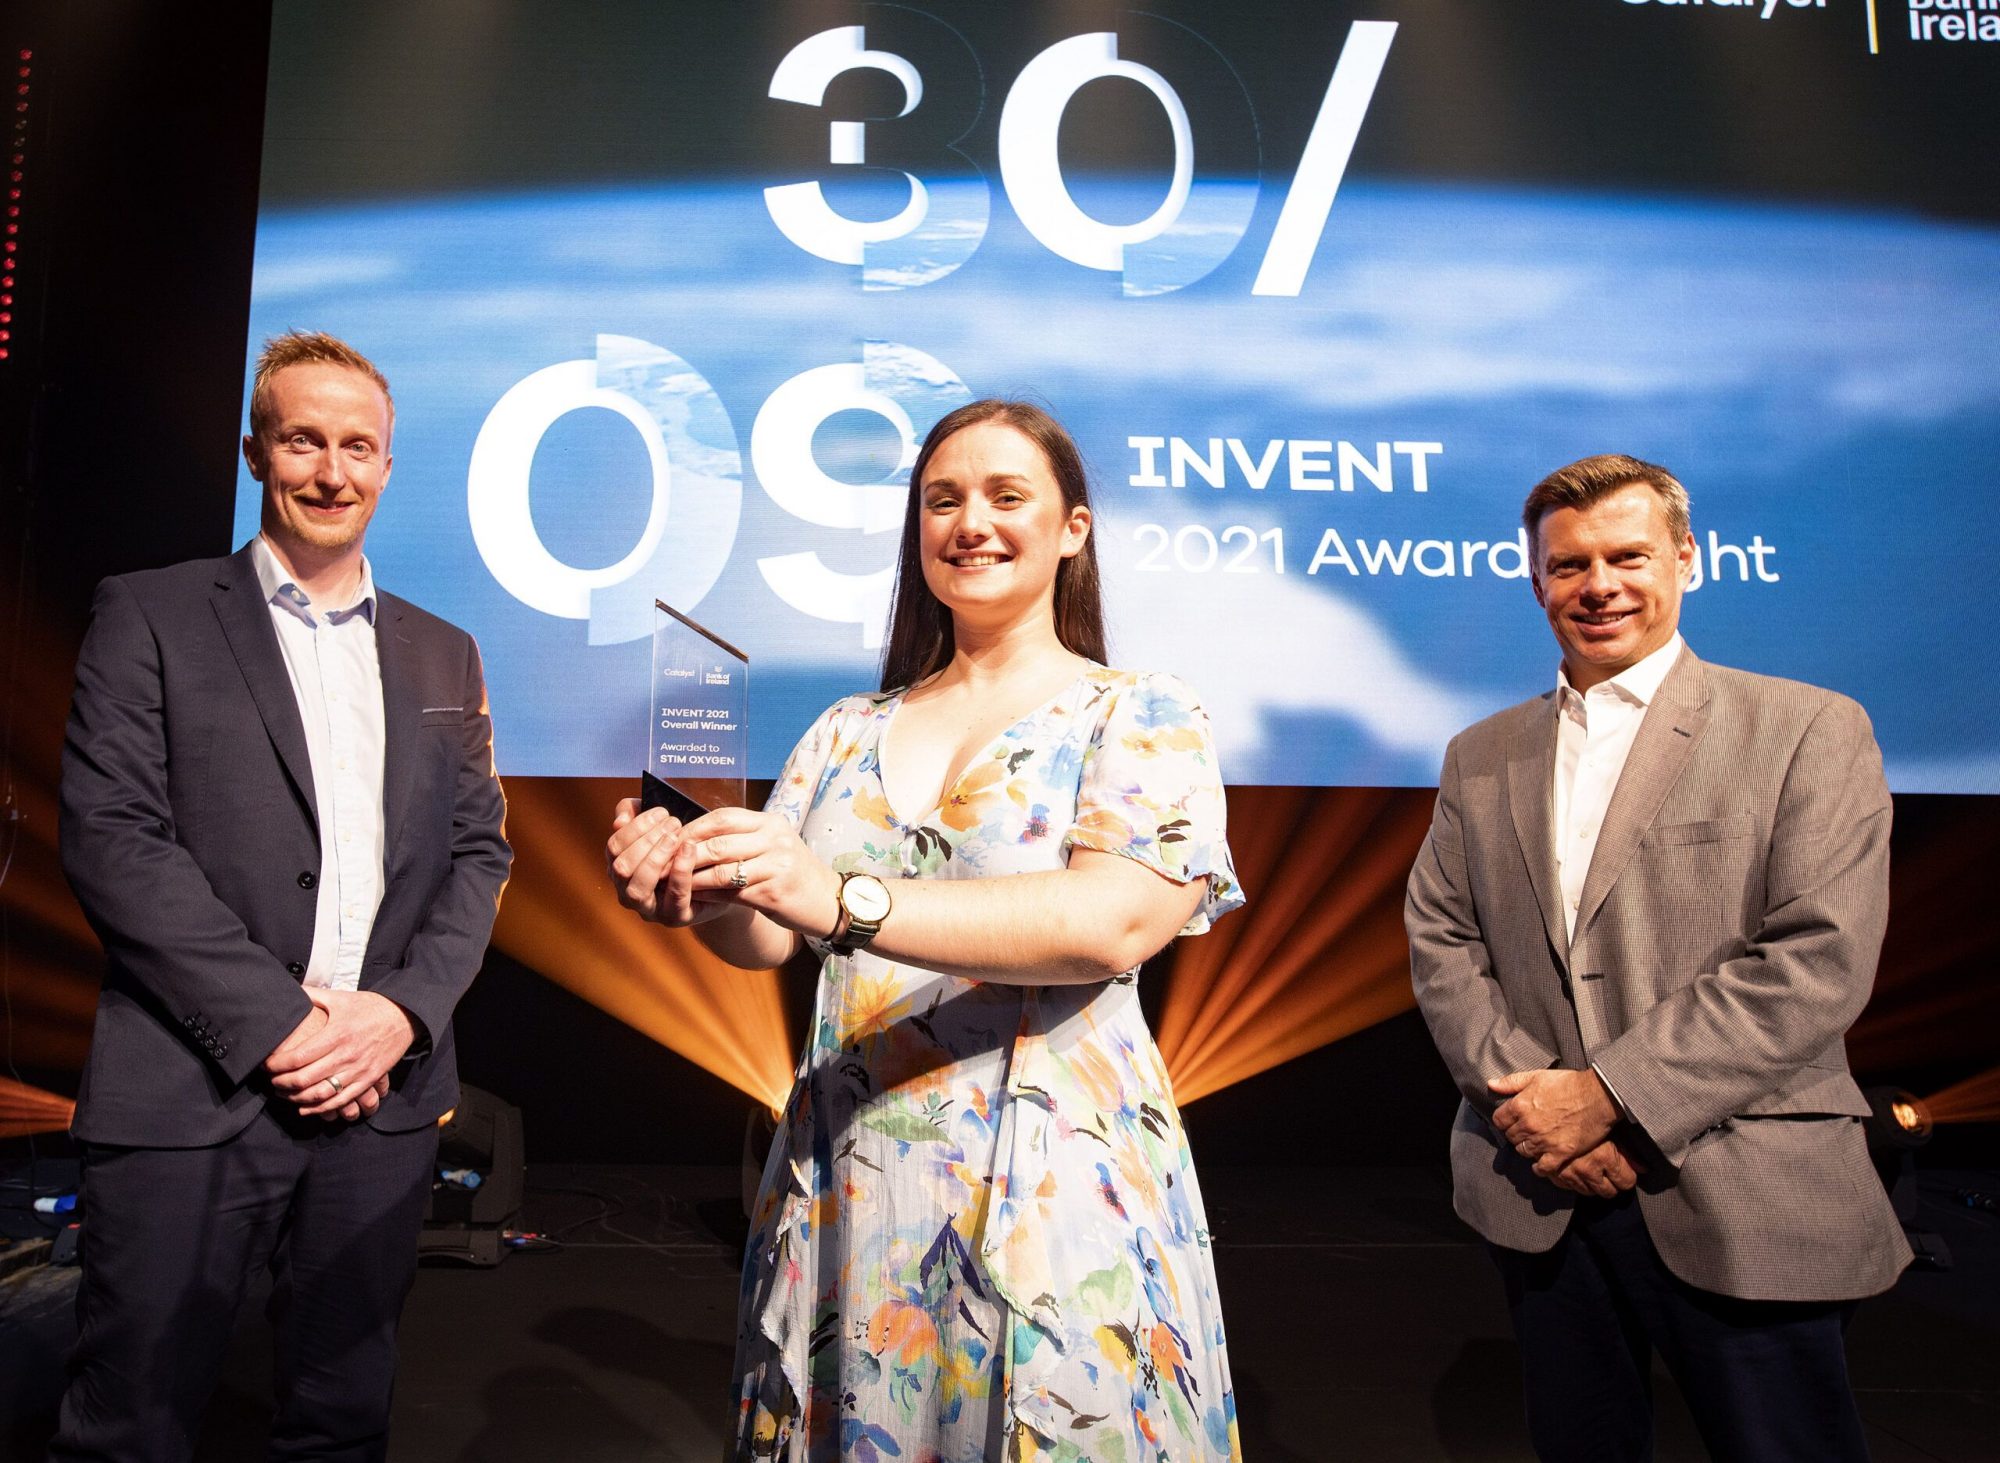 GROUND-BREAKING CANCER TREATMENT TECHNOLOGY STARTUP NAMED OVERALL WINNER OF INVENT 2021